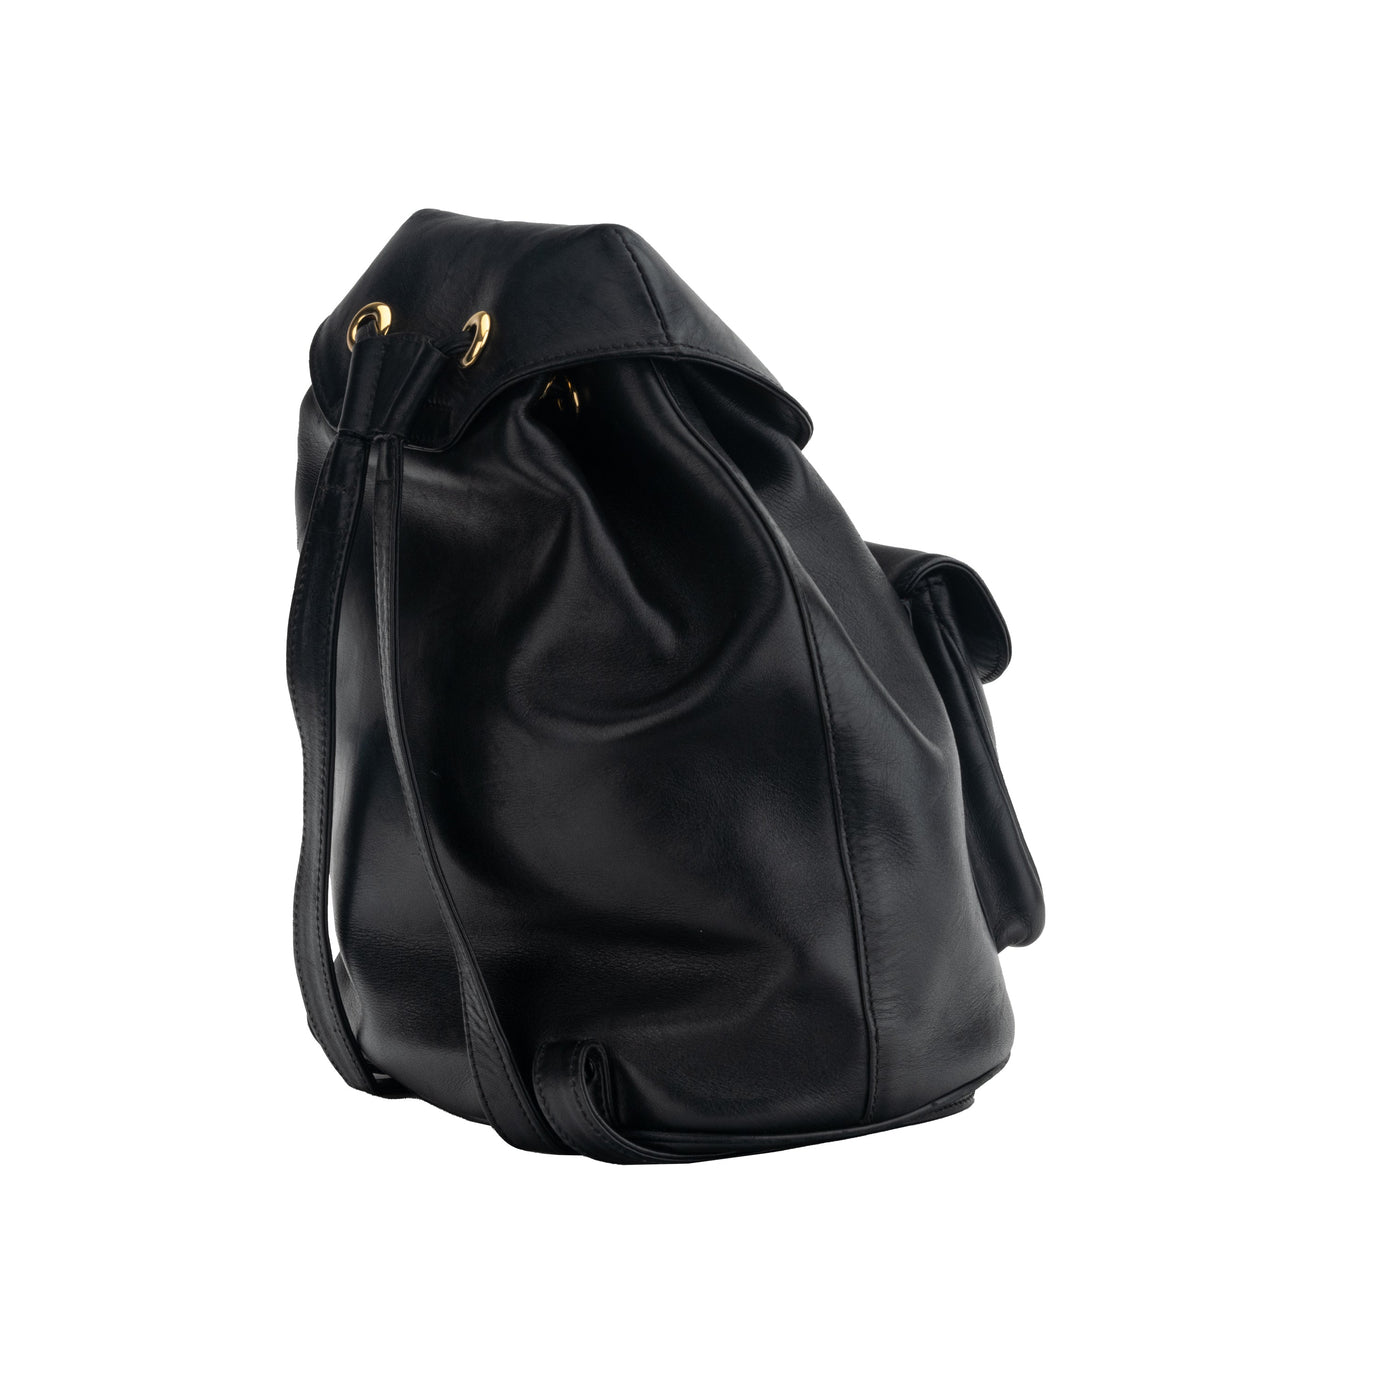 Christian Dior mini leather backpack "Lady Dior" pre-owned